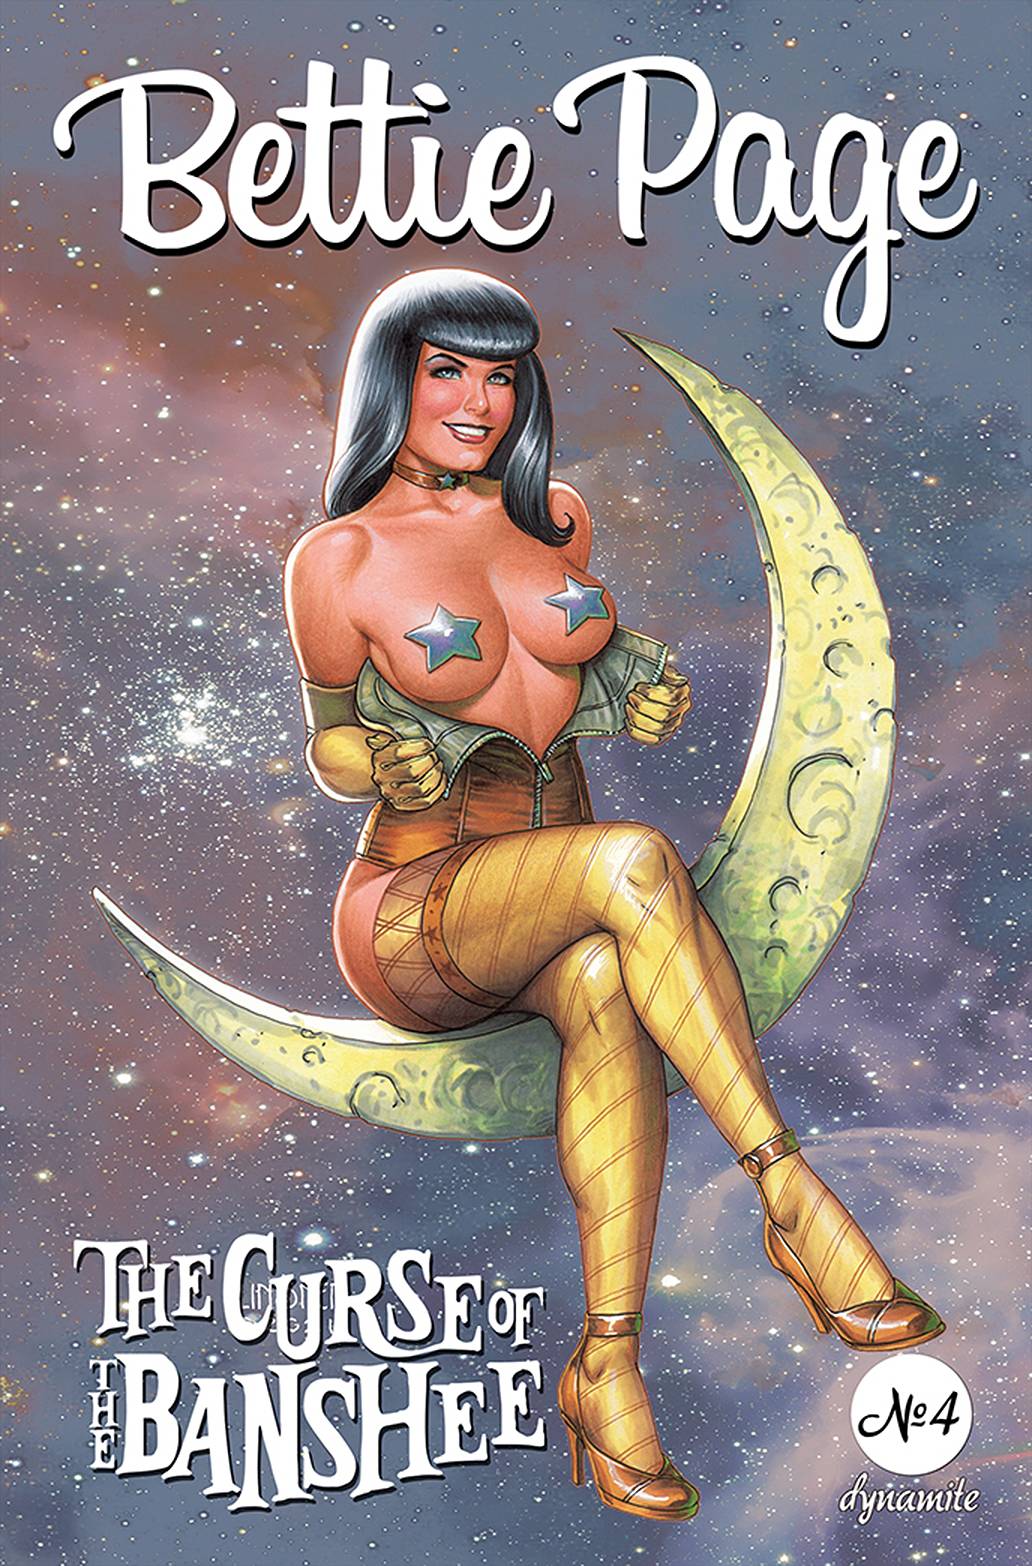 B8 Bettie Page The Curse Of The Banshee # 4 Cover C NM Dynamite 